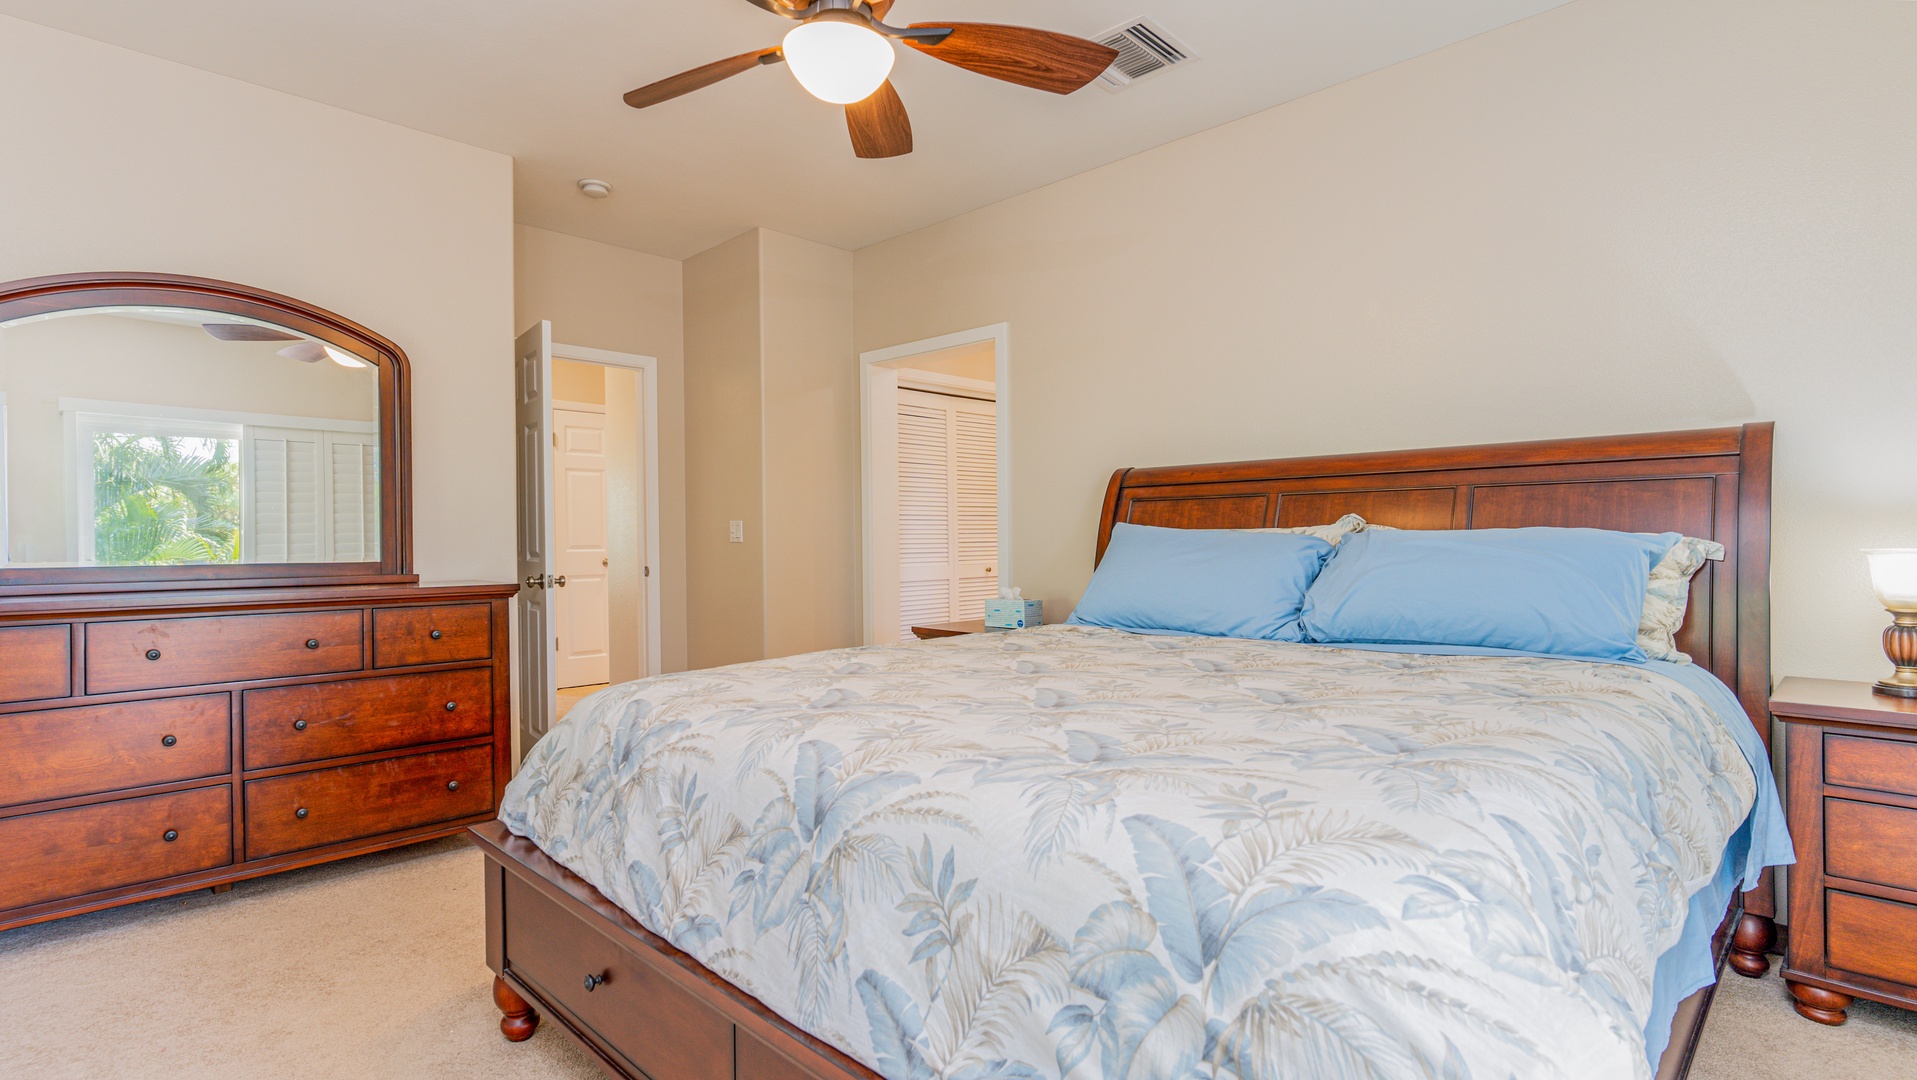 Kapolei Vacation Rentals, Coconut Plantation 1234-2 - The upstairs guest bedroom with storage for clothes.